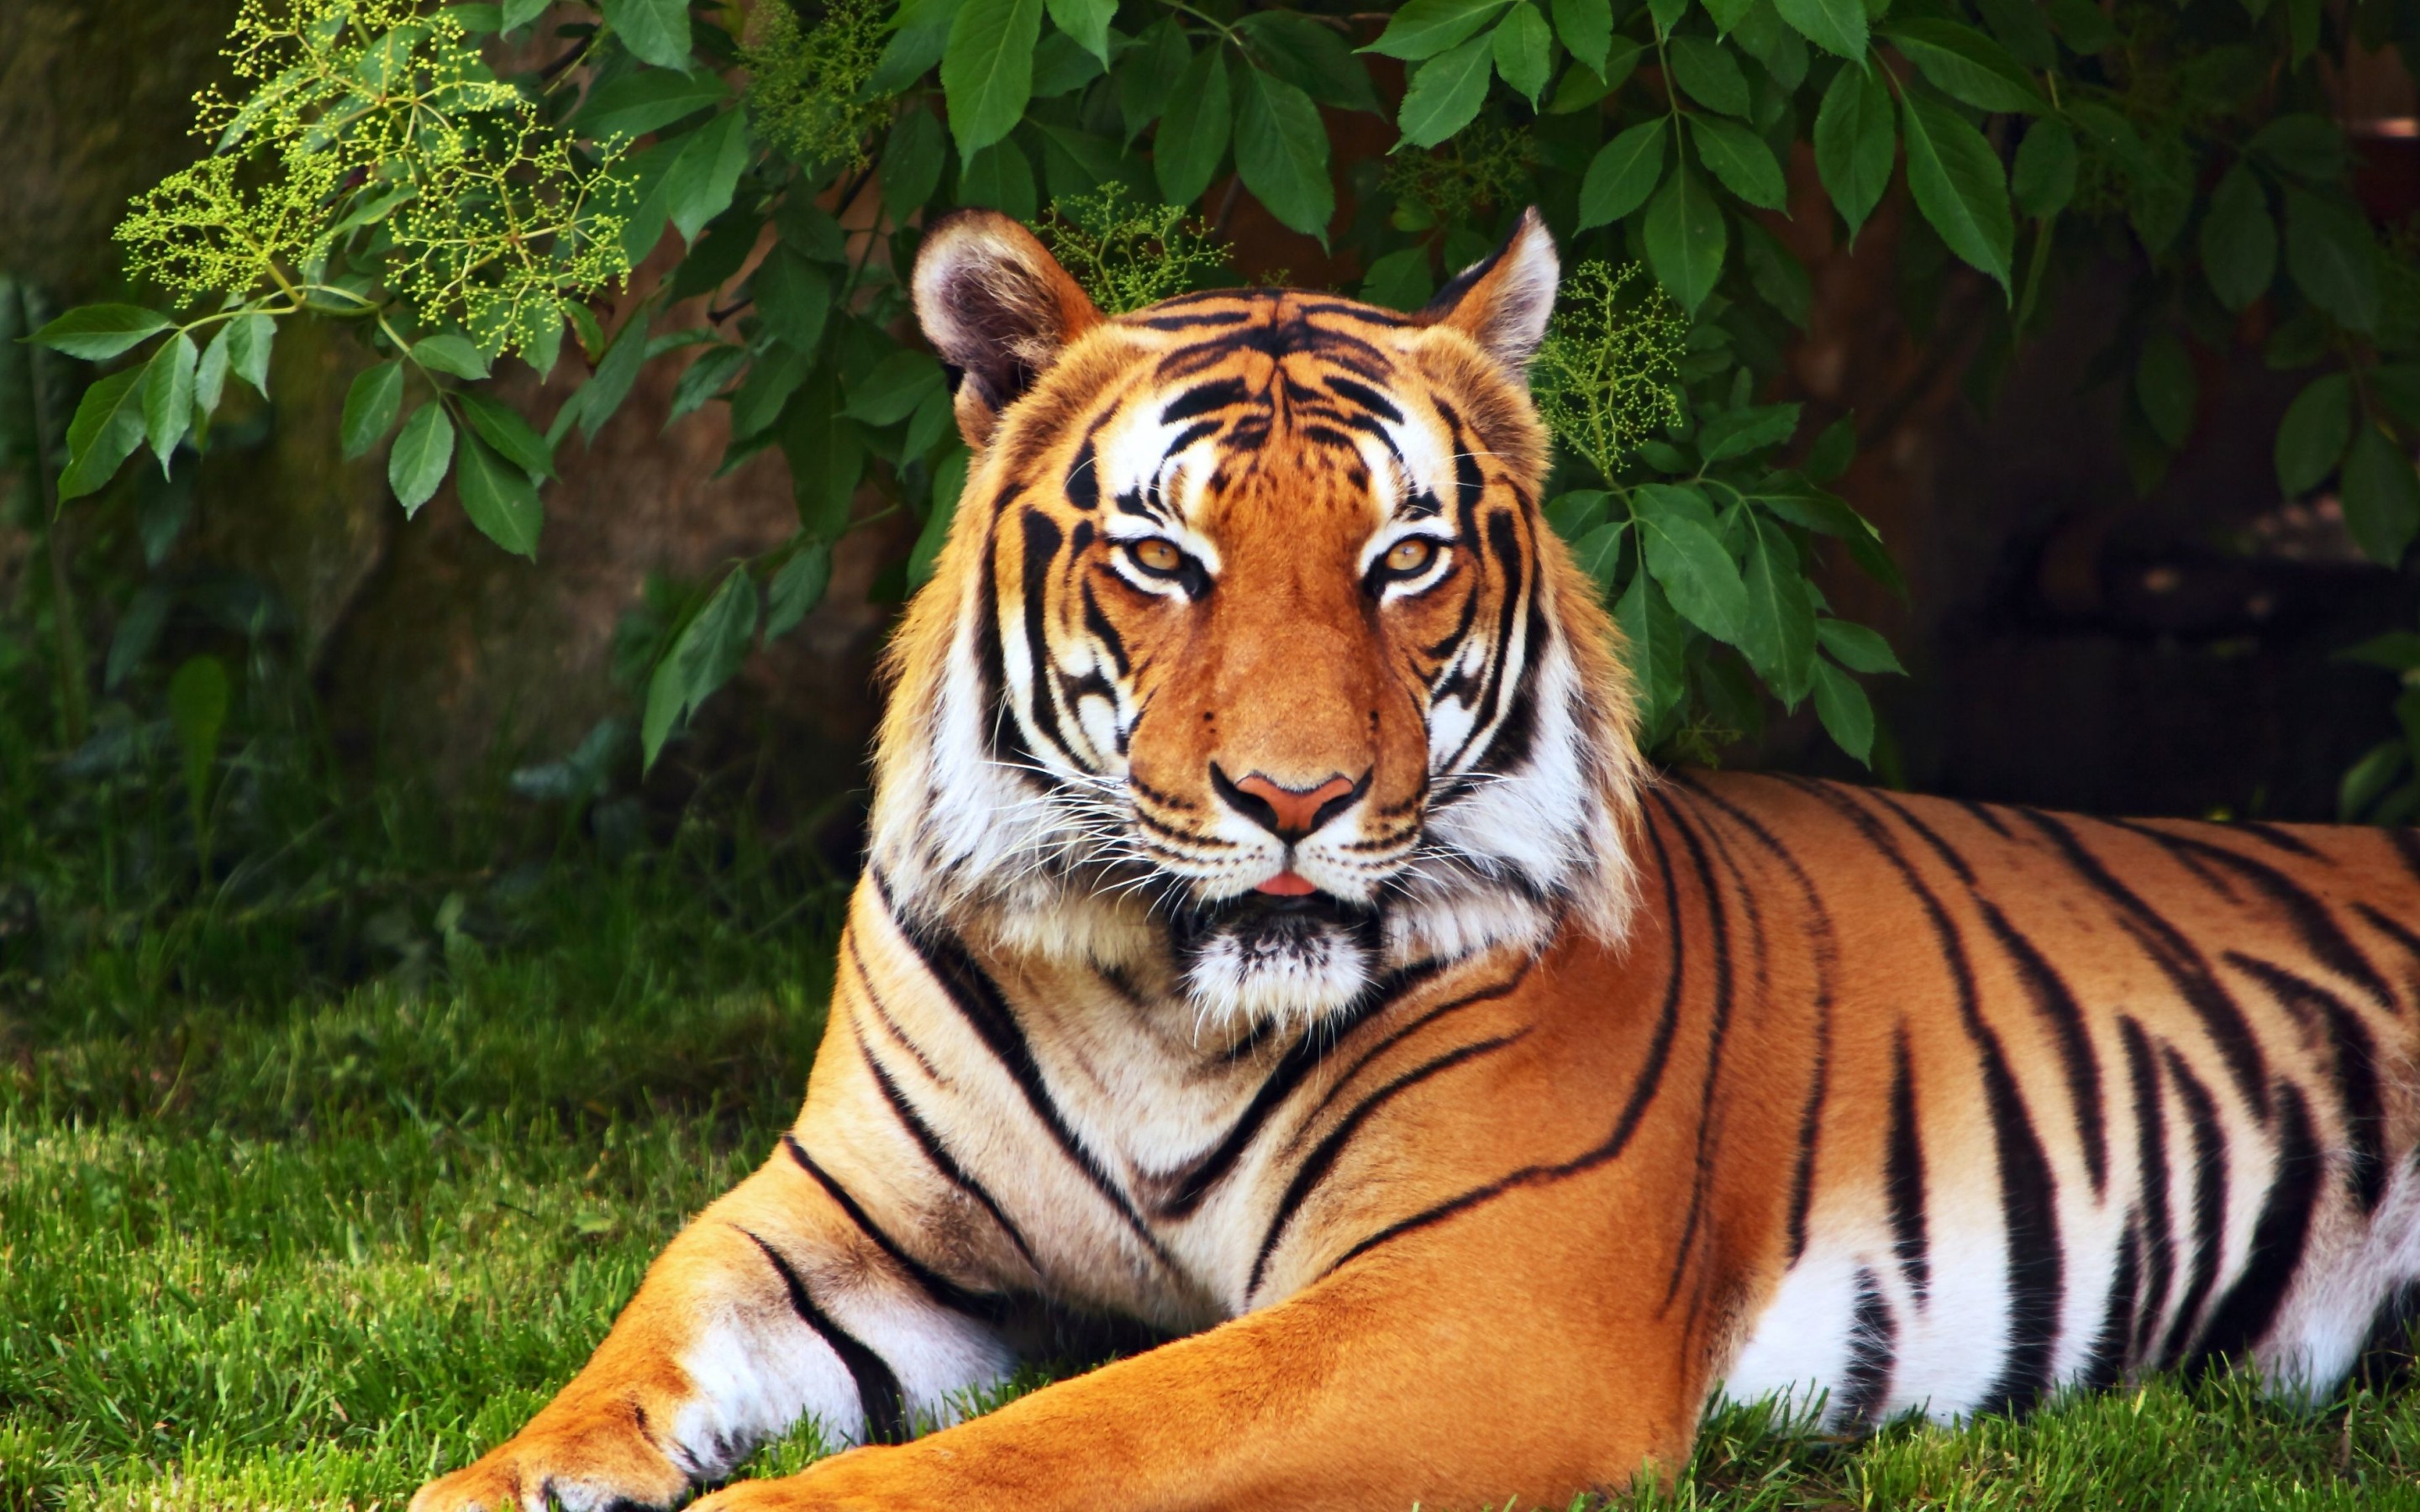 Tiger Images Wallpaper Hd Pics Latest Photos Wild Animal | Images HD